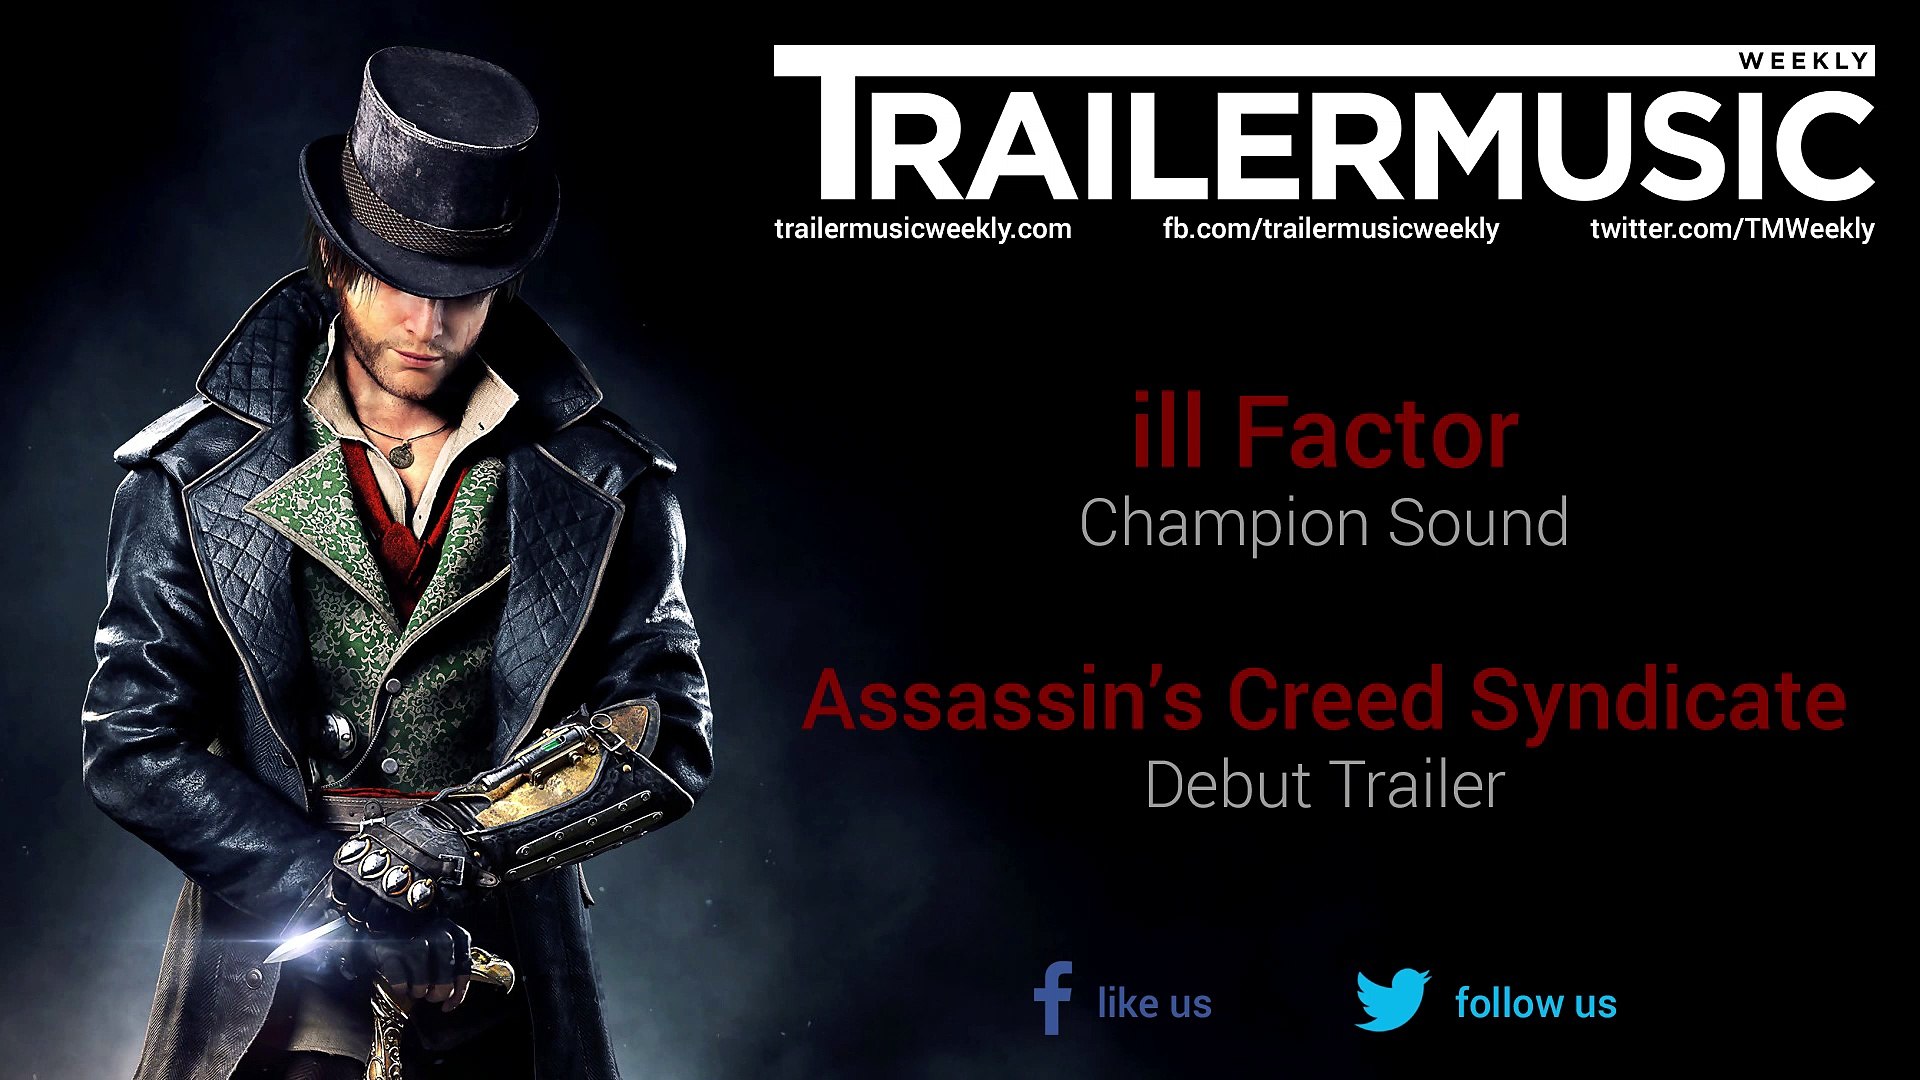 Assassin's Creed Syndicate - Debut Trailer Music #1 (ill Factor - Champion Sound) - Dailymotion